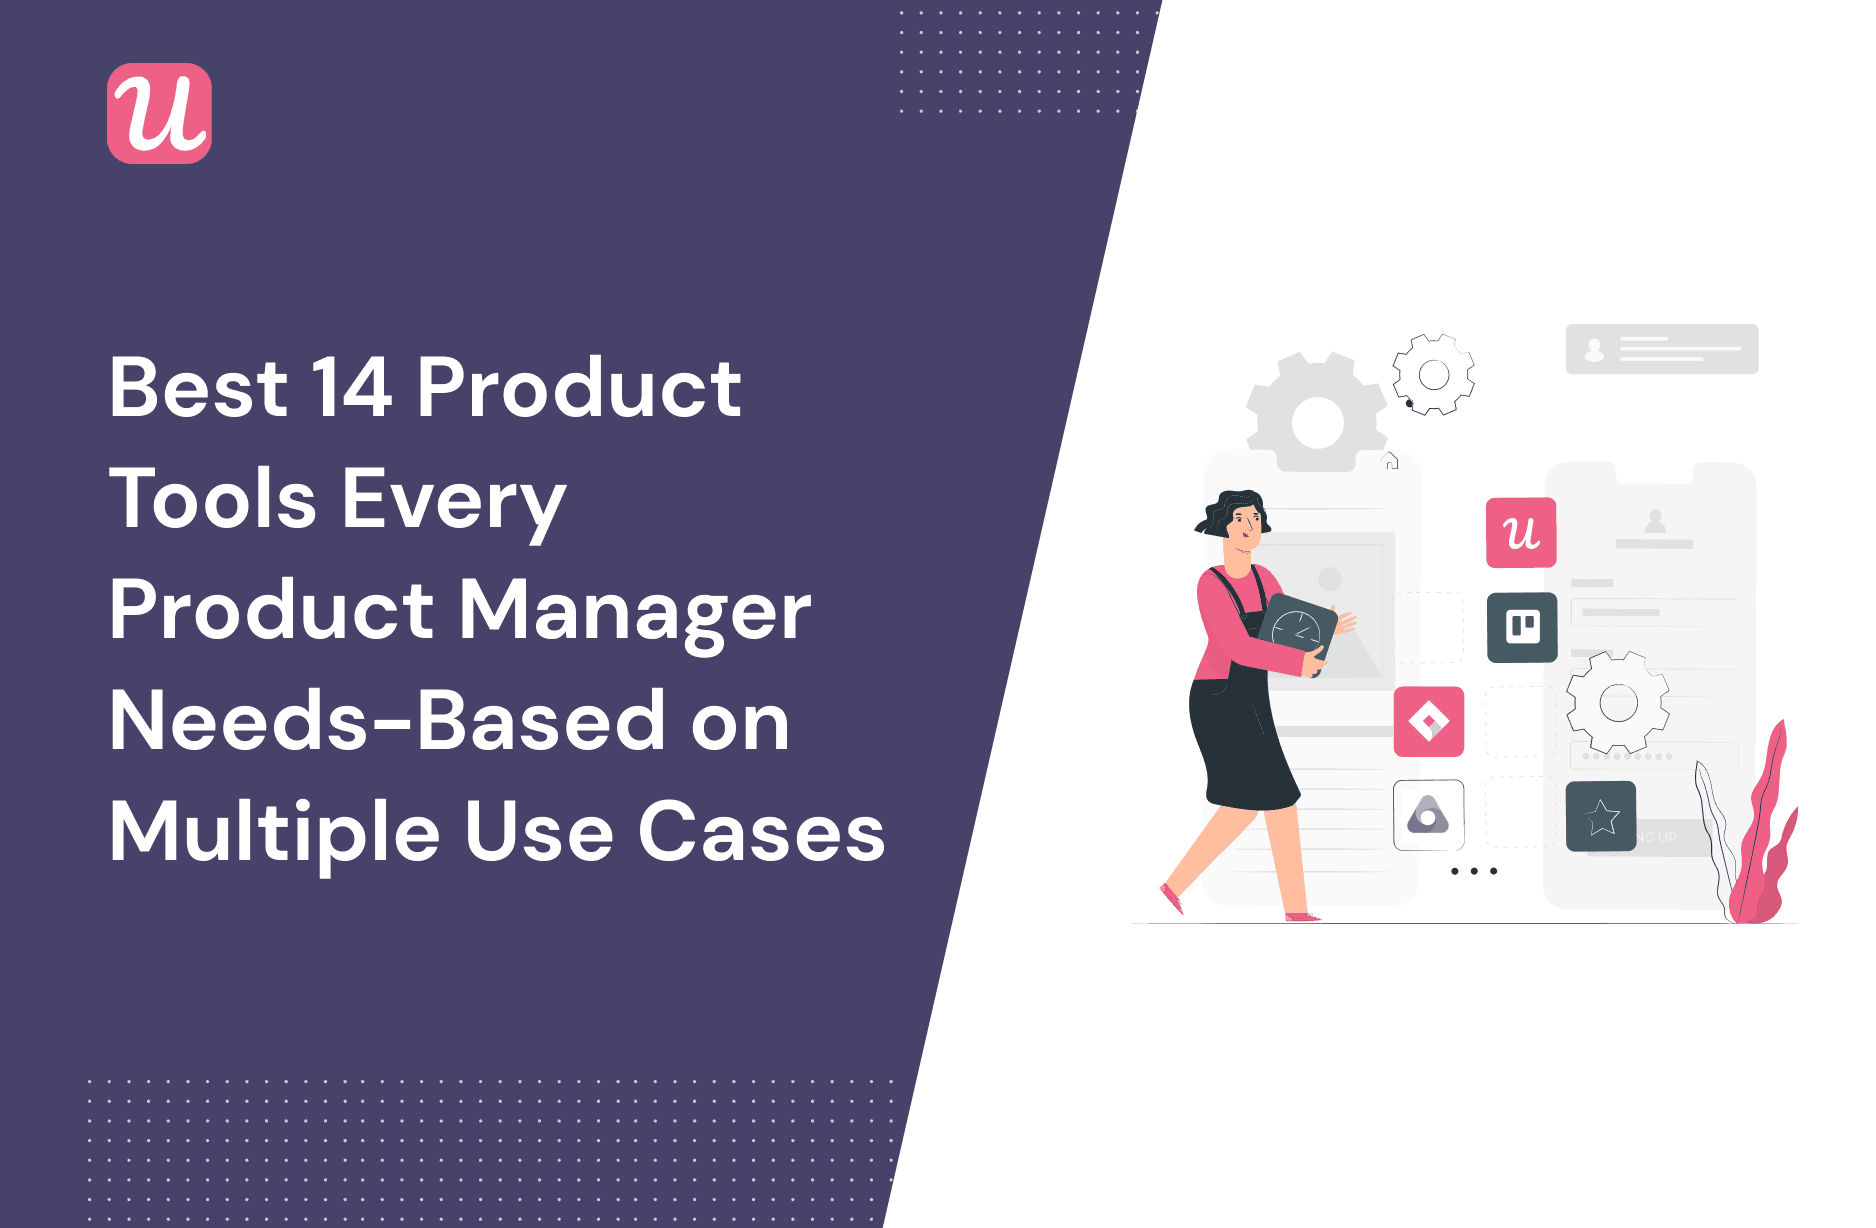 The 14 Best Product Tools Every Product Manager Needs - Based on Multiple Use Cases